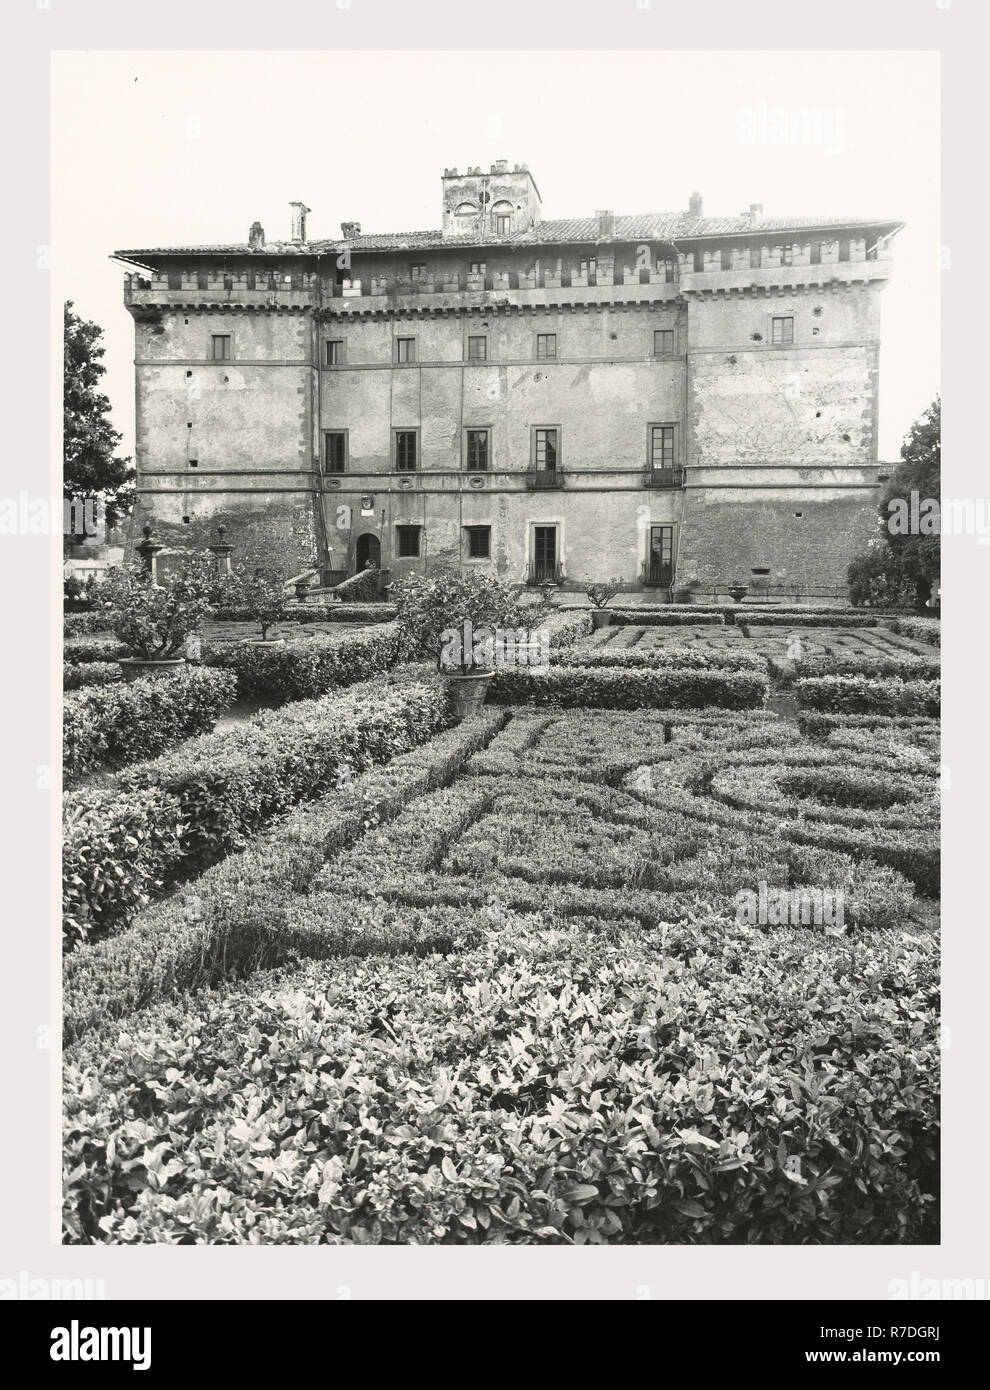 Lazio Viterbo Vignanello Castello Ruspoli, this is my Italy, the italian country of visual history, Exterior views of all sides of castle, renovated 1575, including rear view of park. Stock Photo